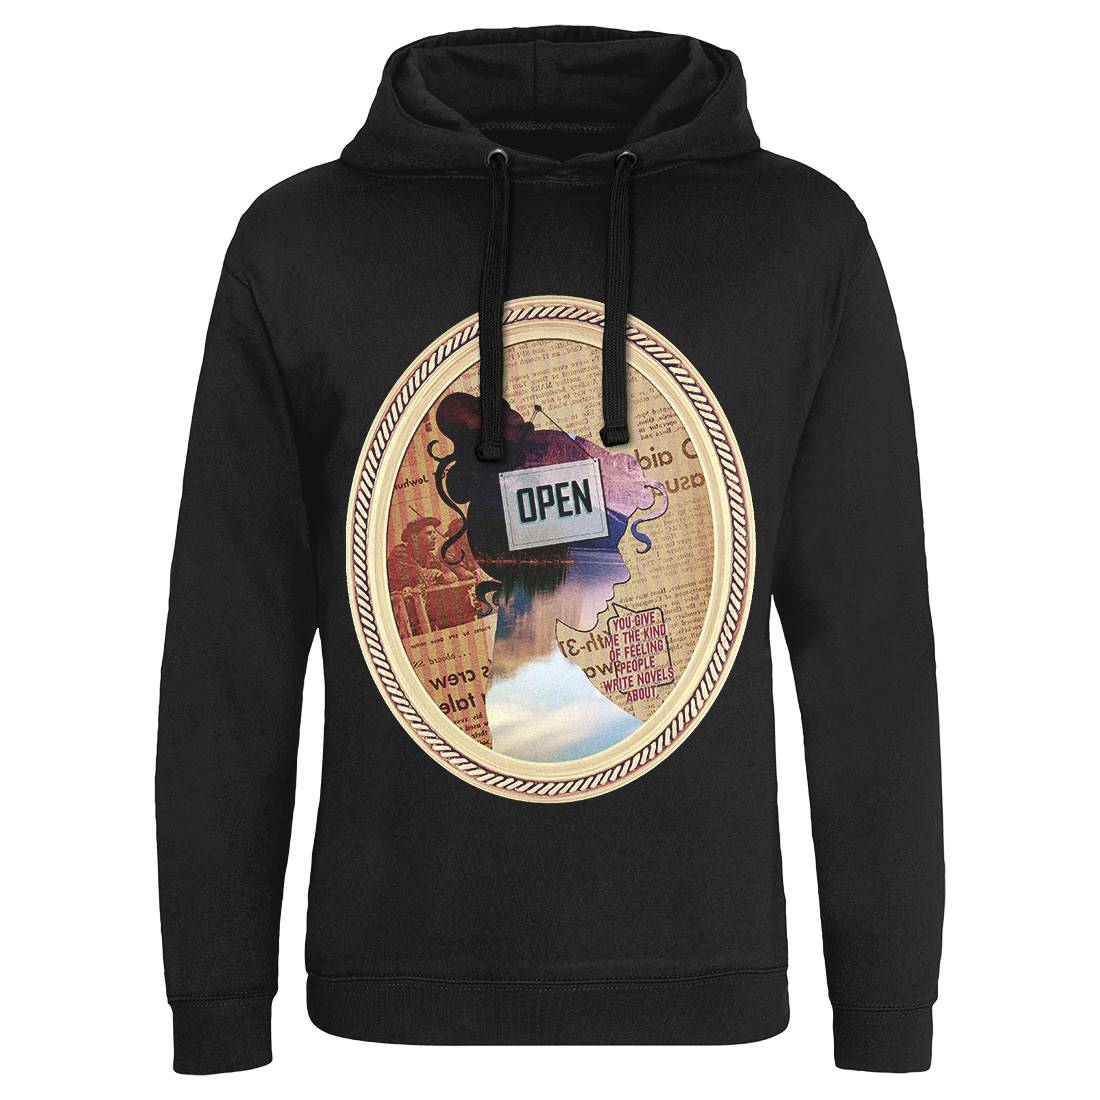 She Speaks Mens Hoodie Without Pocket Art A907